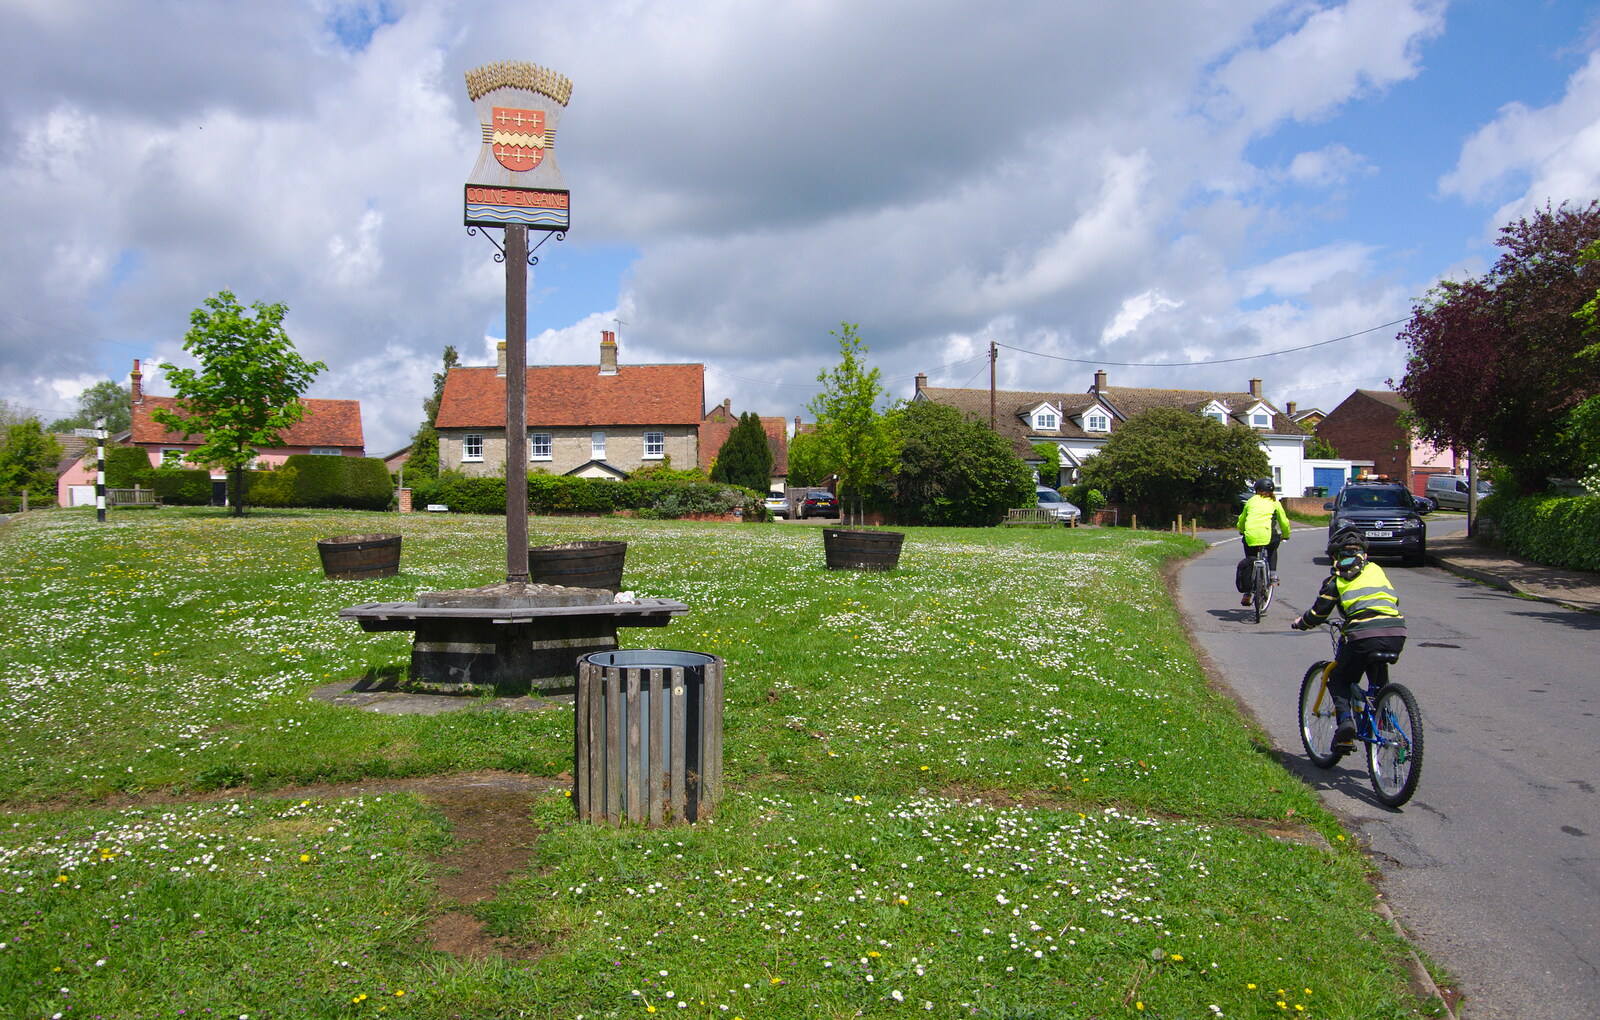 The pretty village of Colne Engaine from The BSCC Bike Ride 2019, Coggeshall, Essex - 11th May 2019